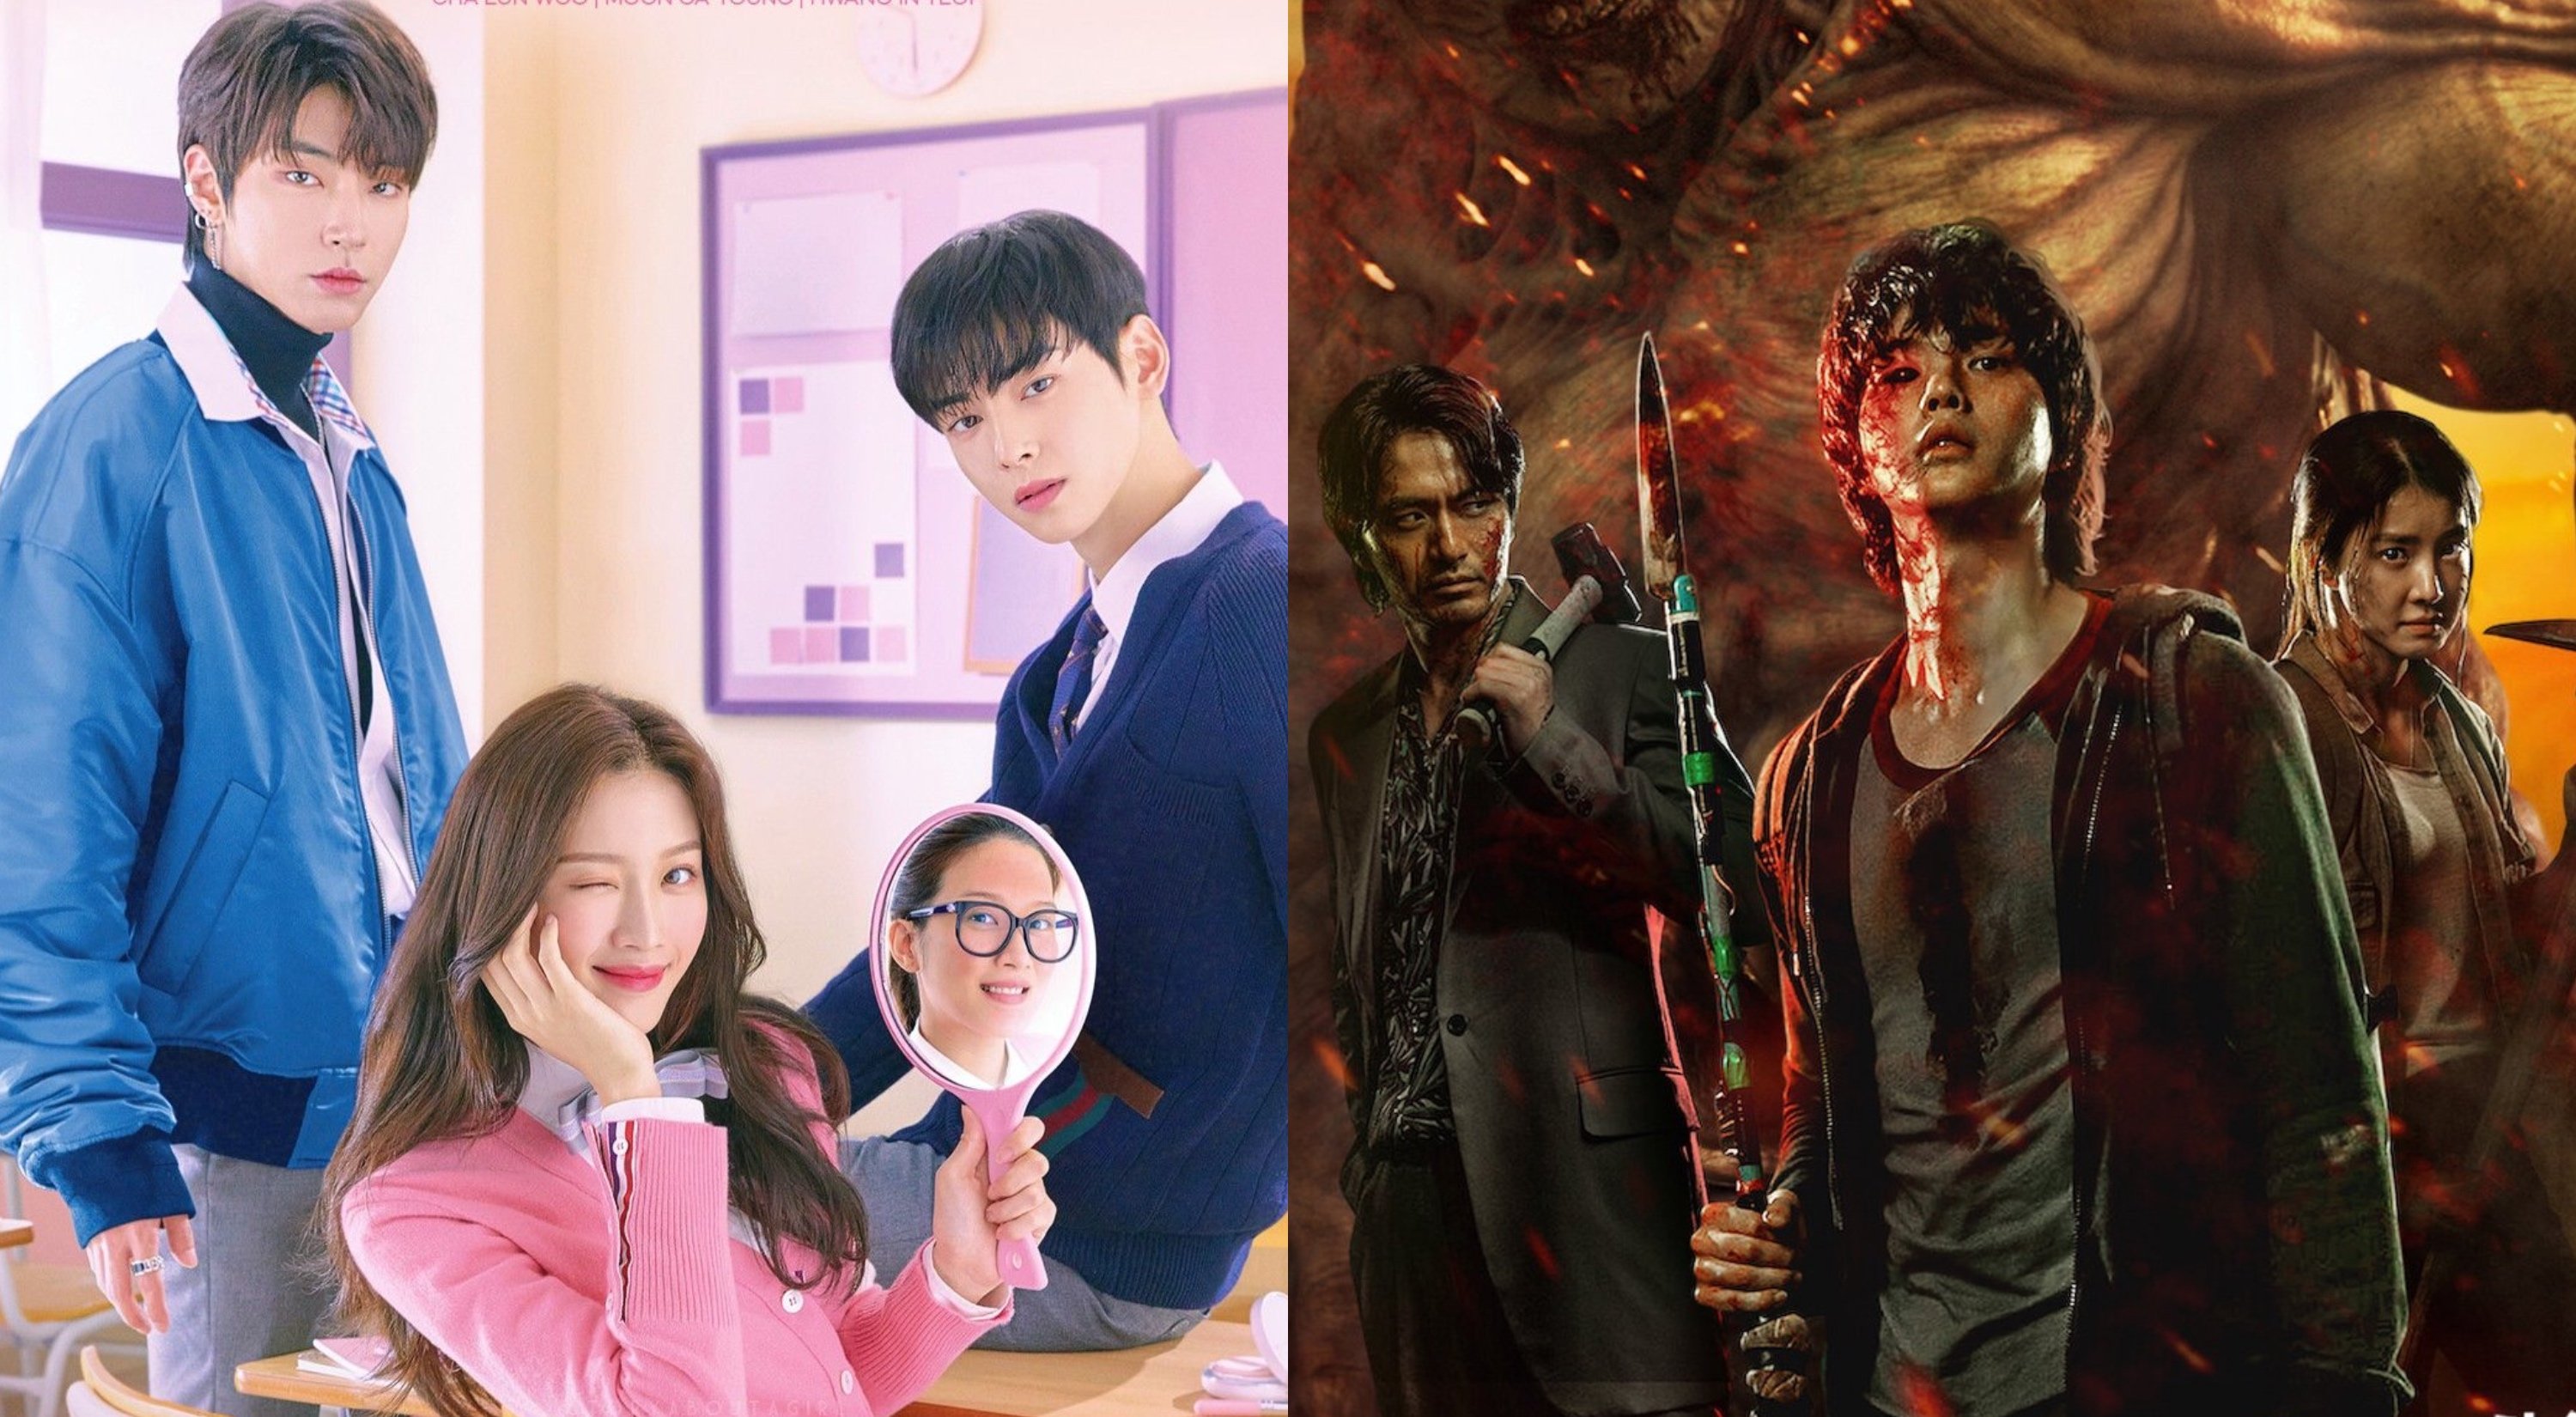 Viki's 'True Beauty' and Netflix's 'Sweet Home' K-dramas students in school uniforms and Song Kang holding weapon.